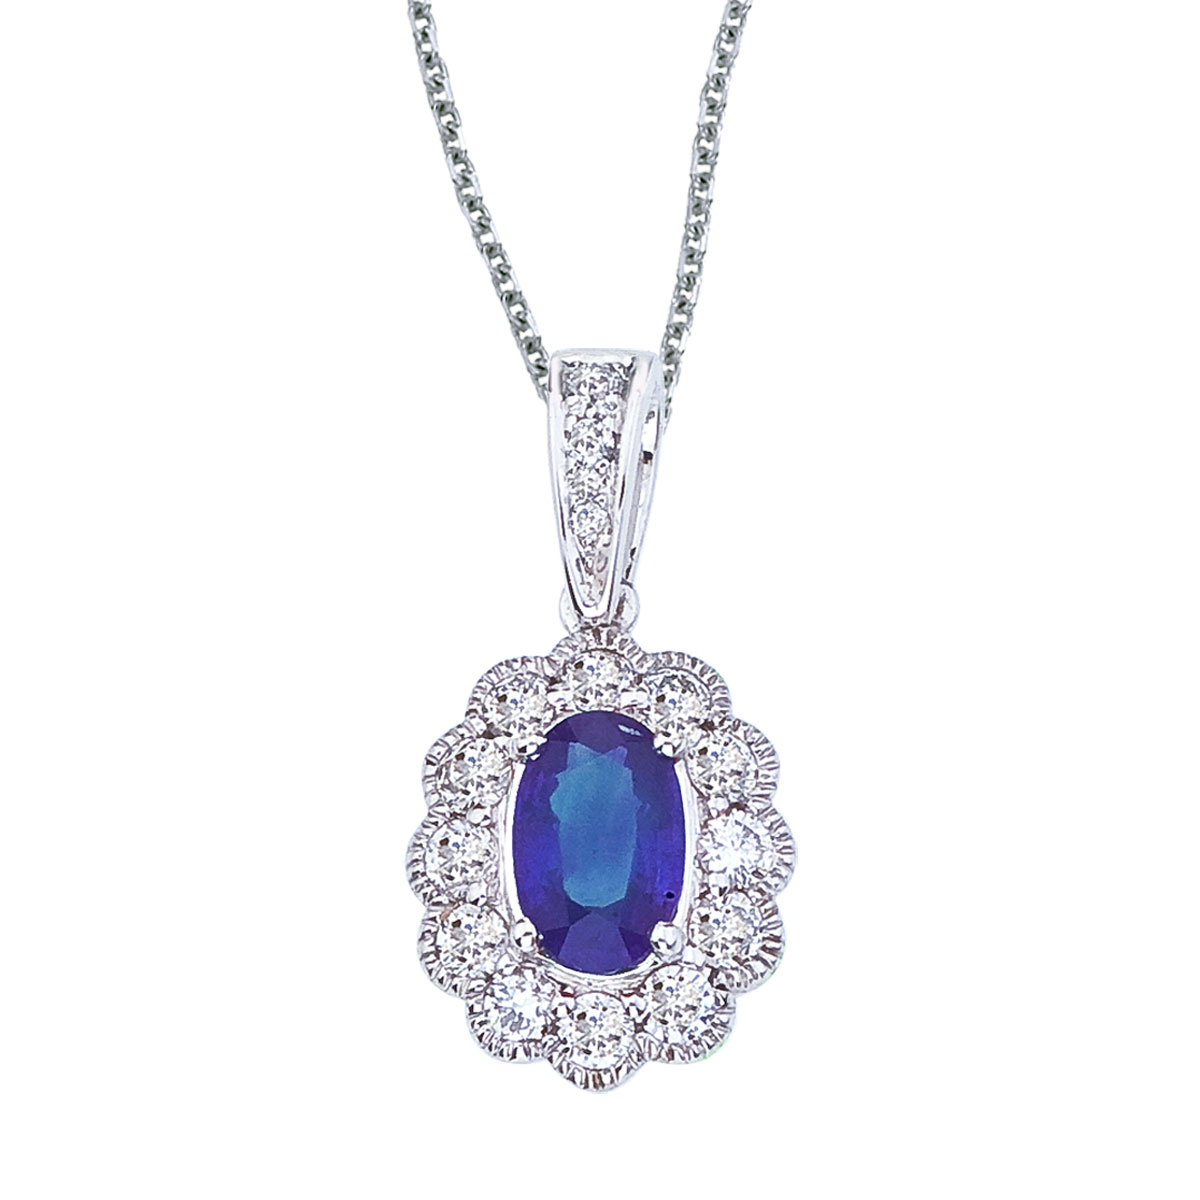 This beautiful 14k white gold pendant features a bright 6x4 mm sapphire with .30 total ct diamonds.